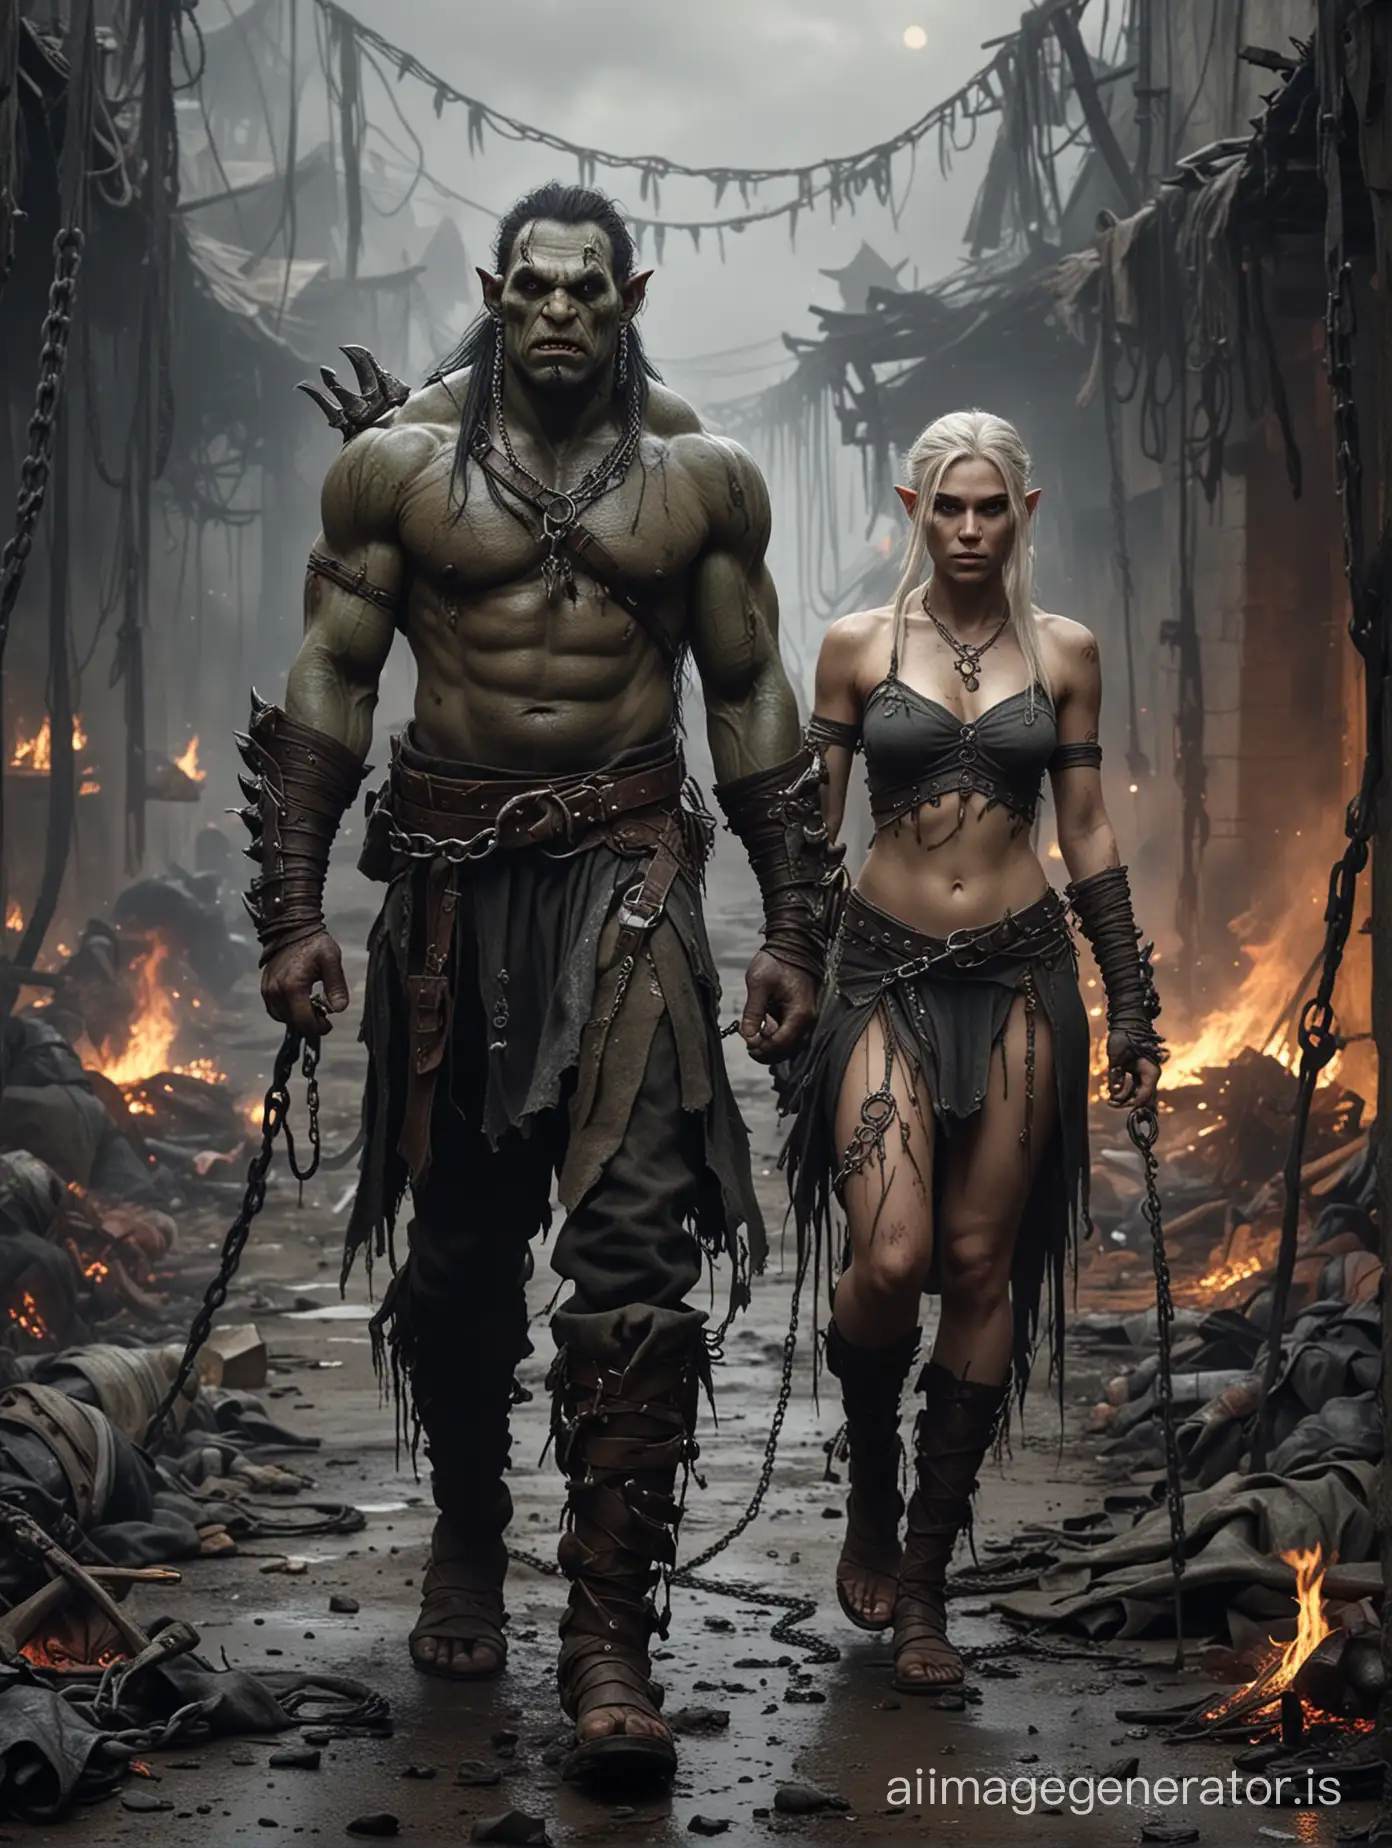 The Orc Leader in his harnass with his female elven slave in chains walking next to him. Slave in tattered rags next to him, in the middle of the orc tribe. Dark and gloomy, fires burn, the orcs feast